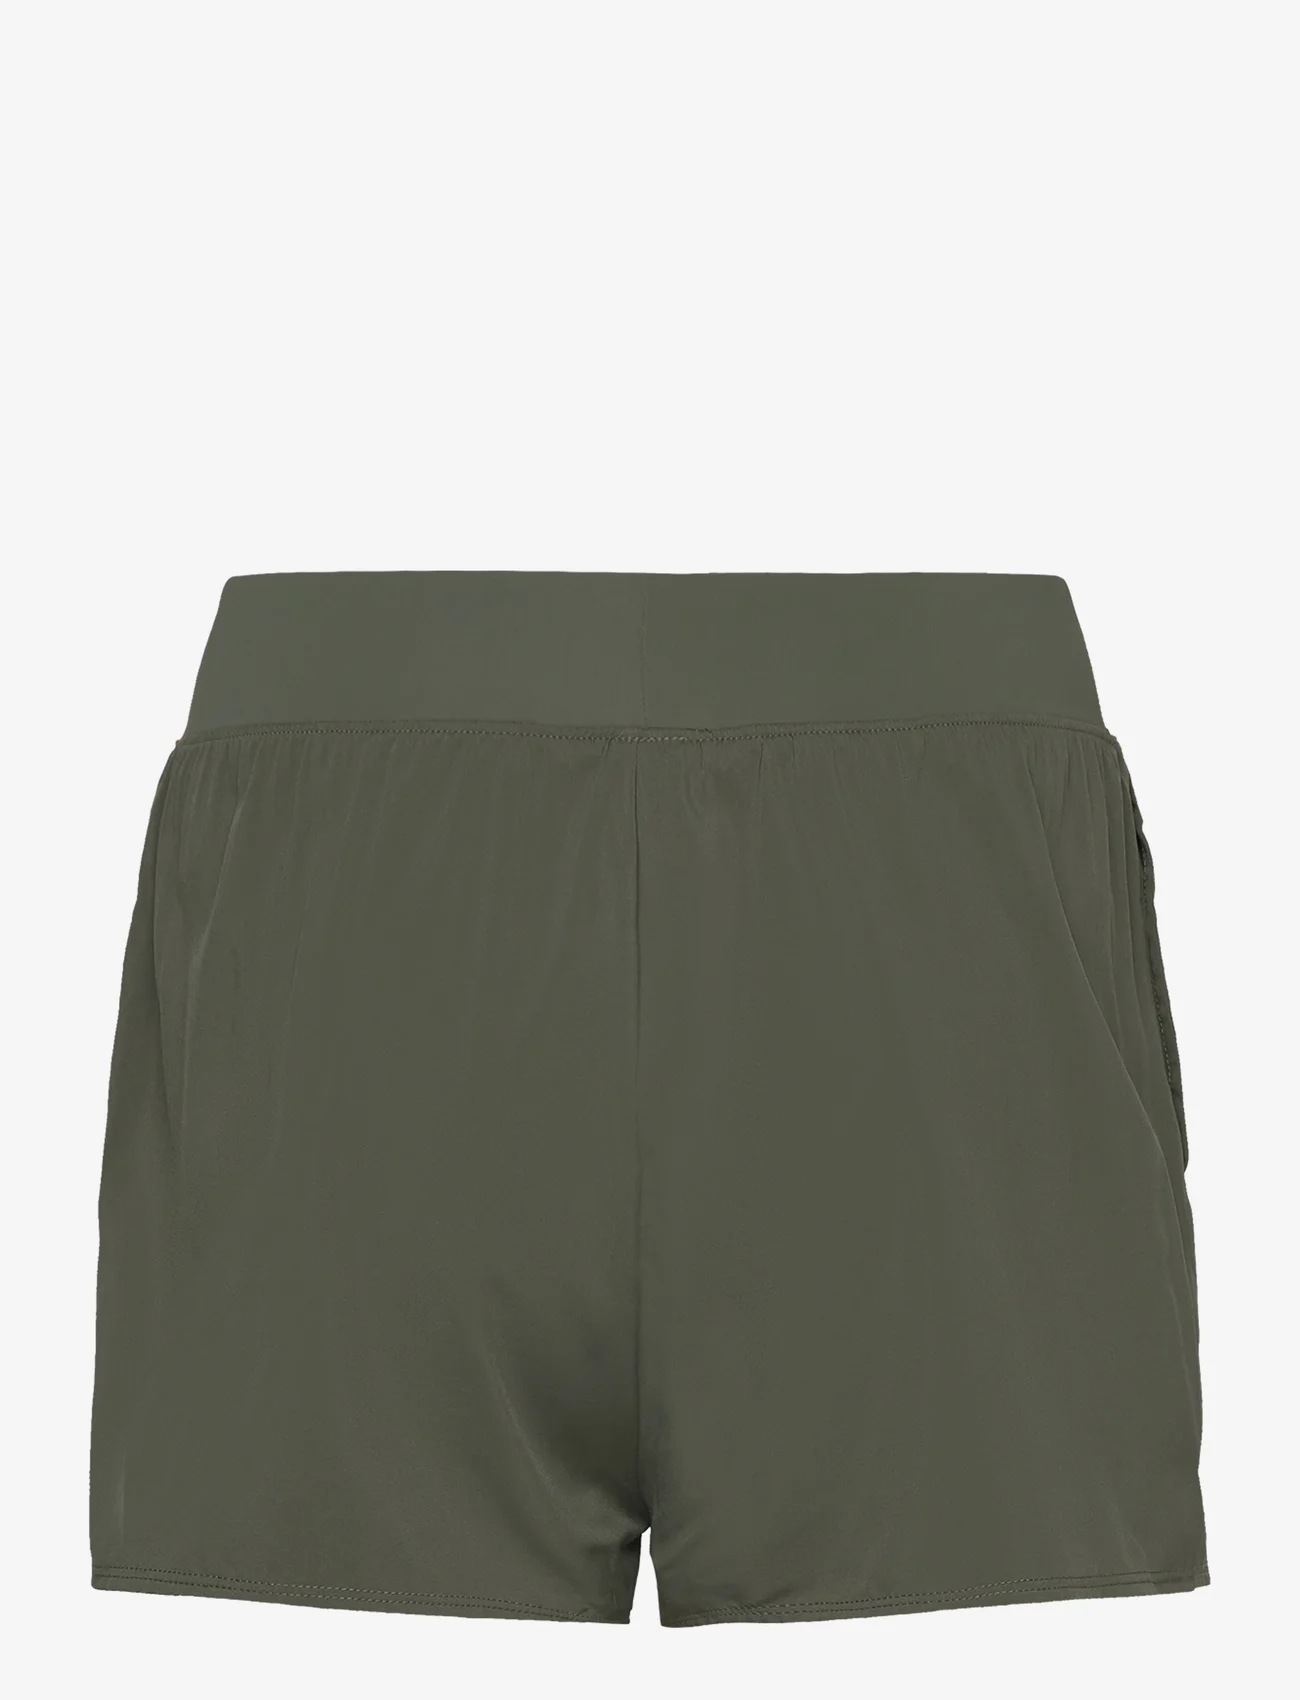 RS Sports - Women’s Performance Court Shorts - 2 in 1 with Ball Pockets - deep green - 1